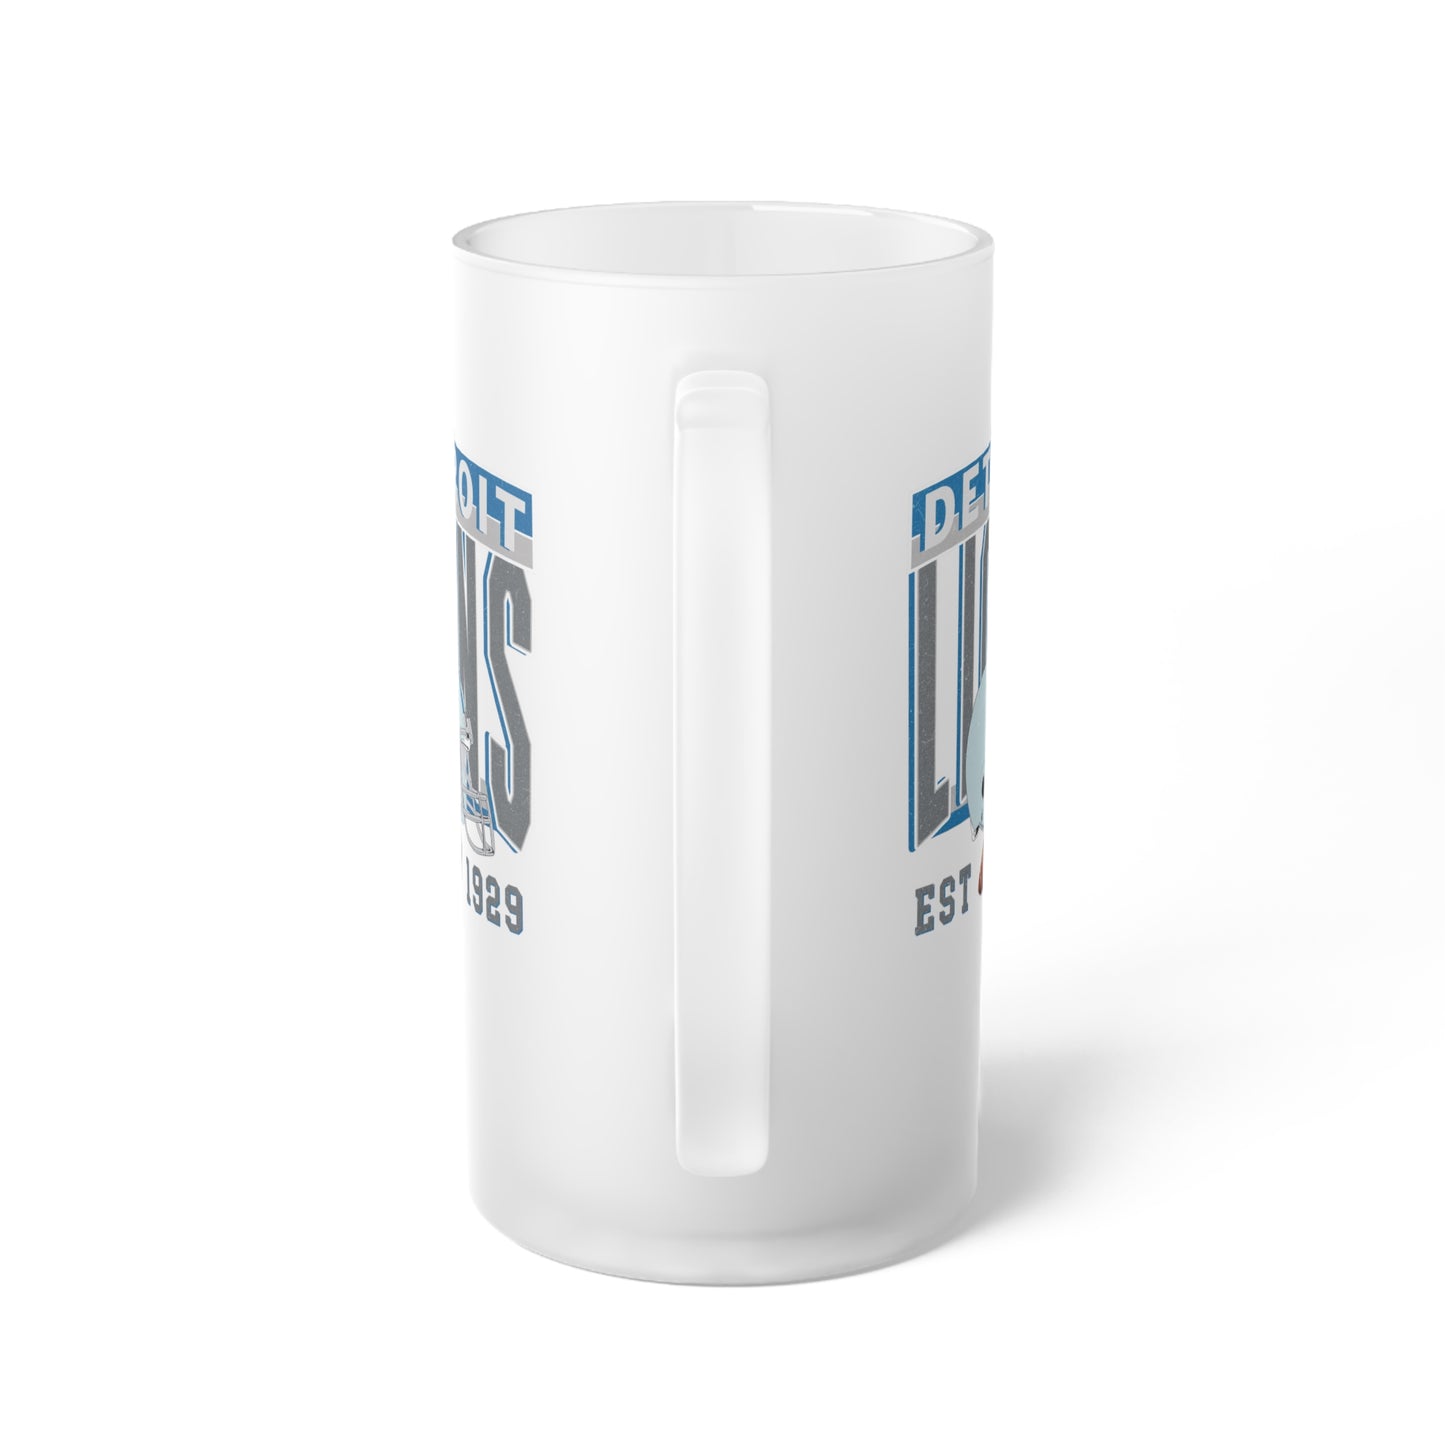 Detroit Football Frosted Glass Beer Mug